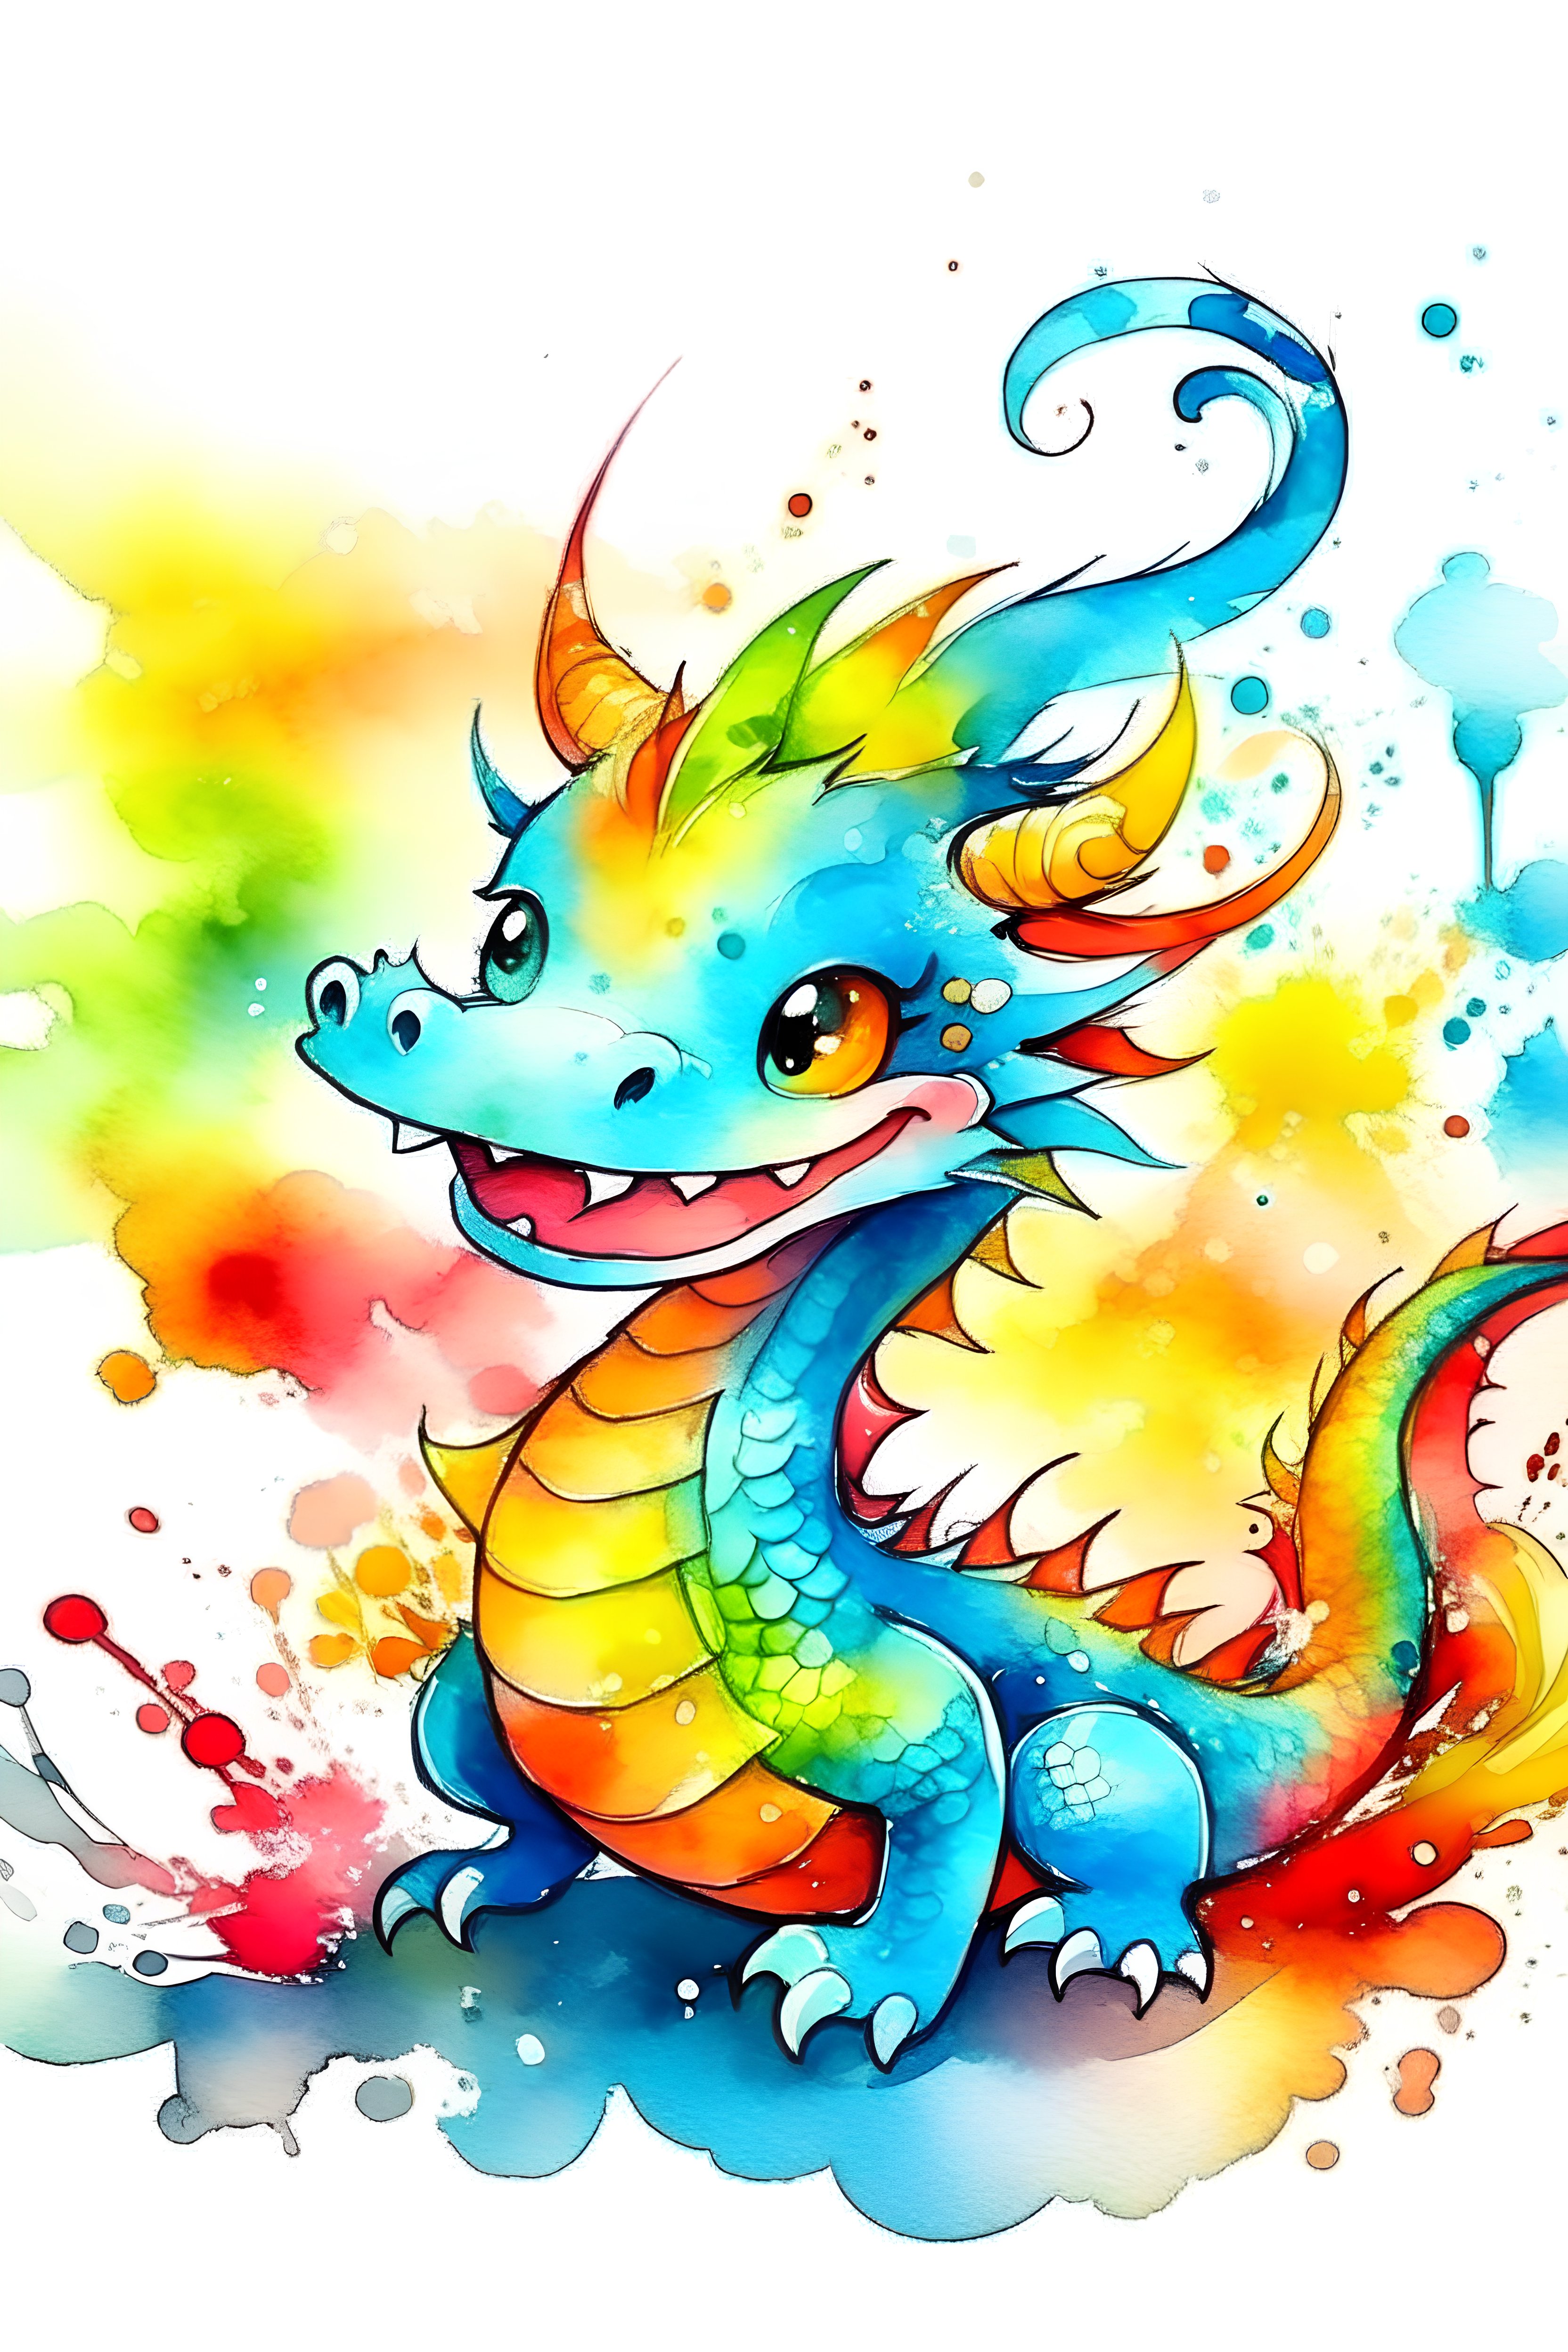 Dragon Drawing Ideas - Apps on Google Play